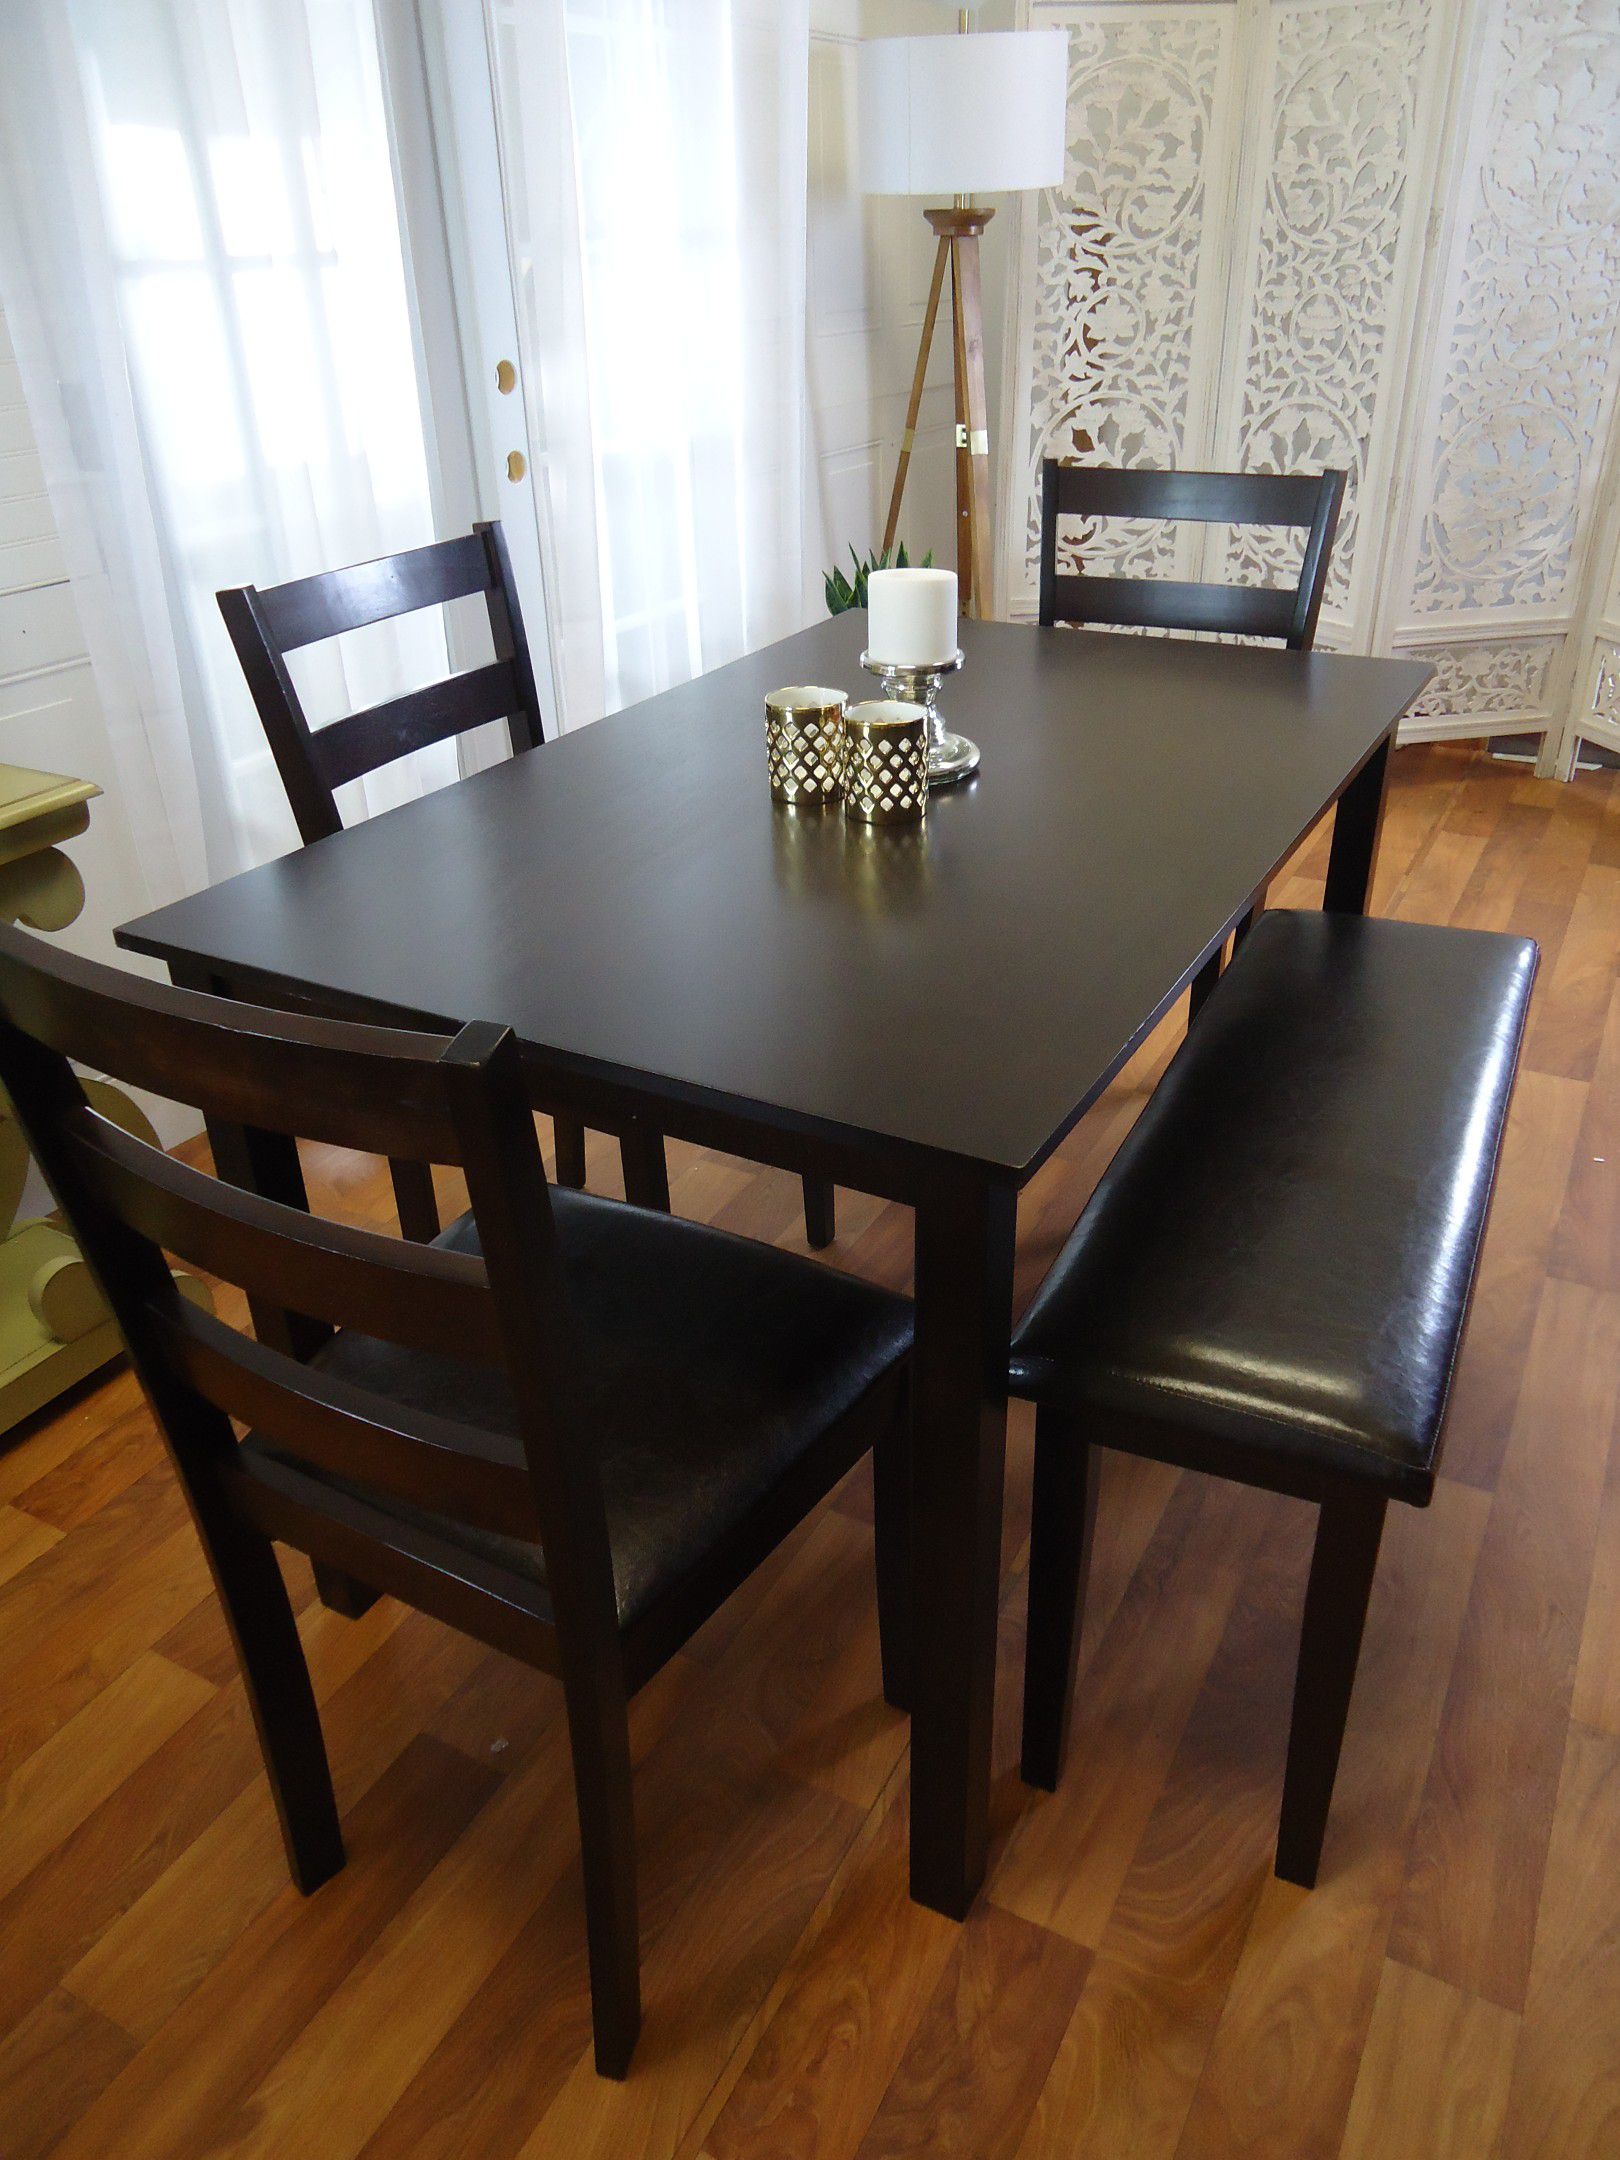 New Dining table Set Dining Room Tables